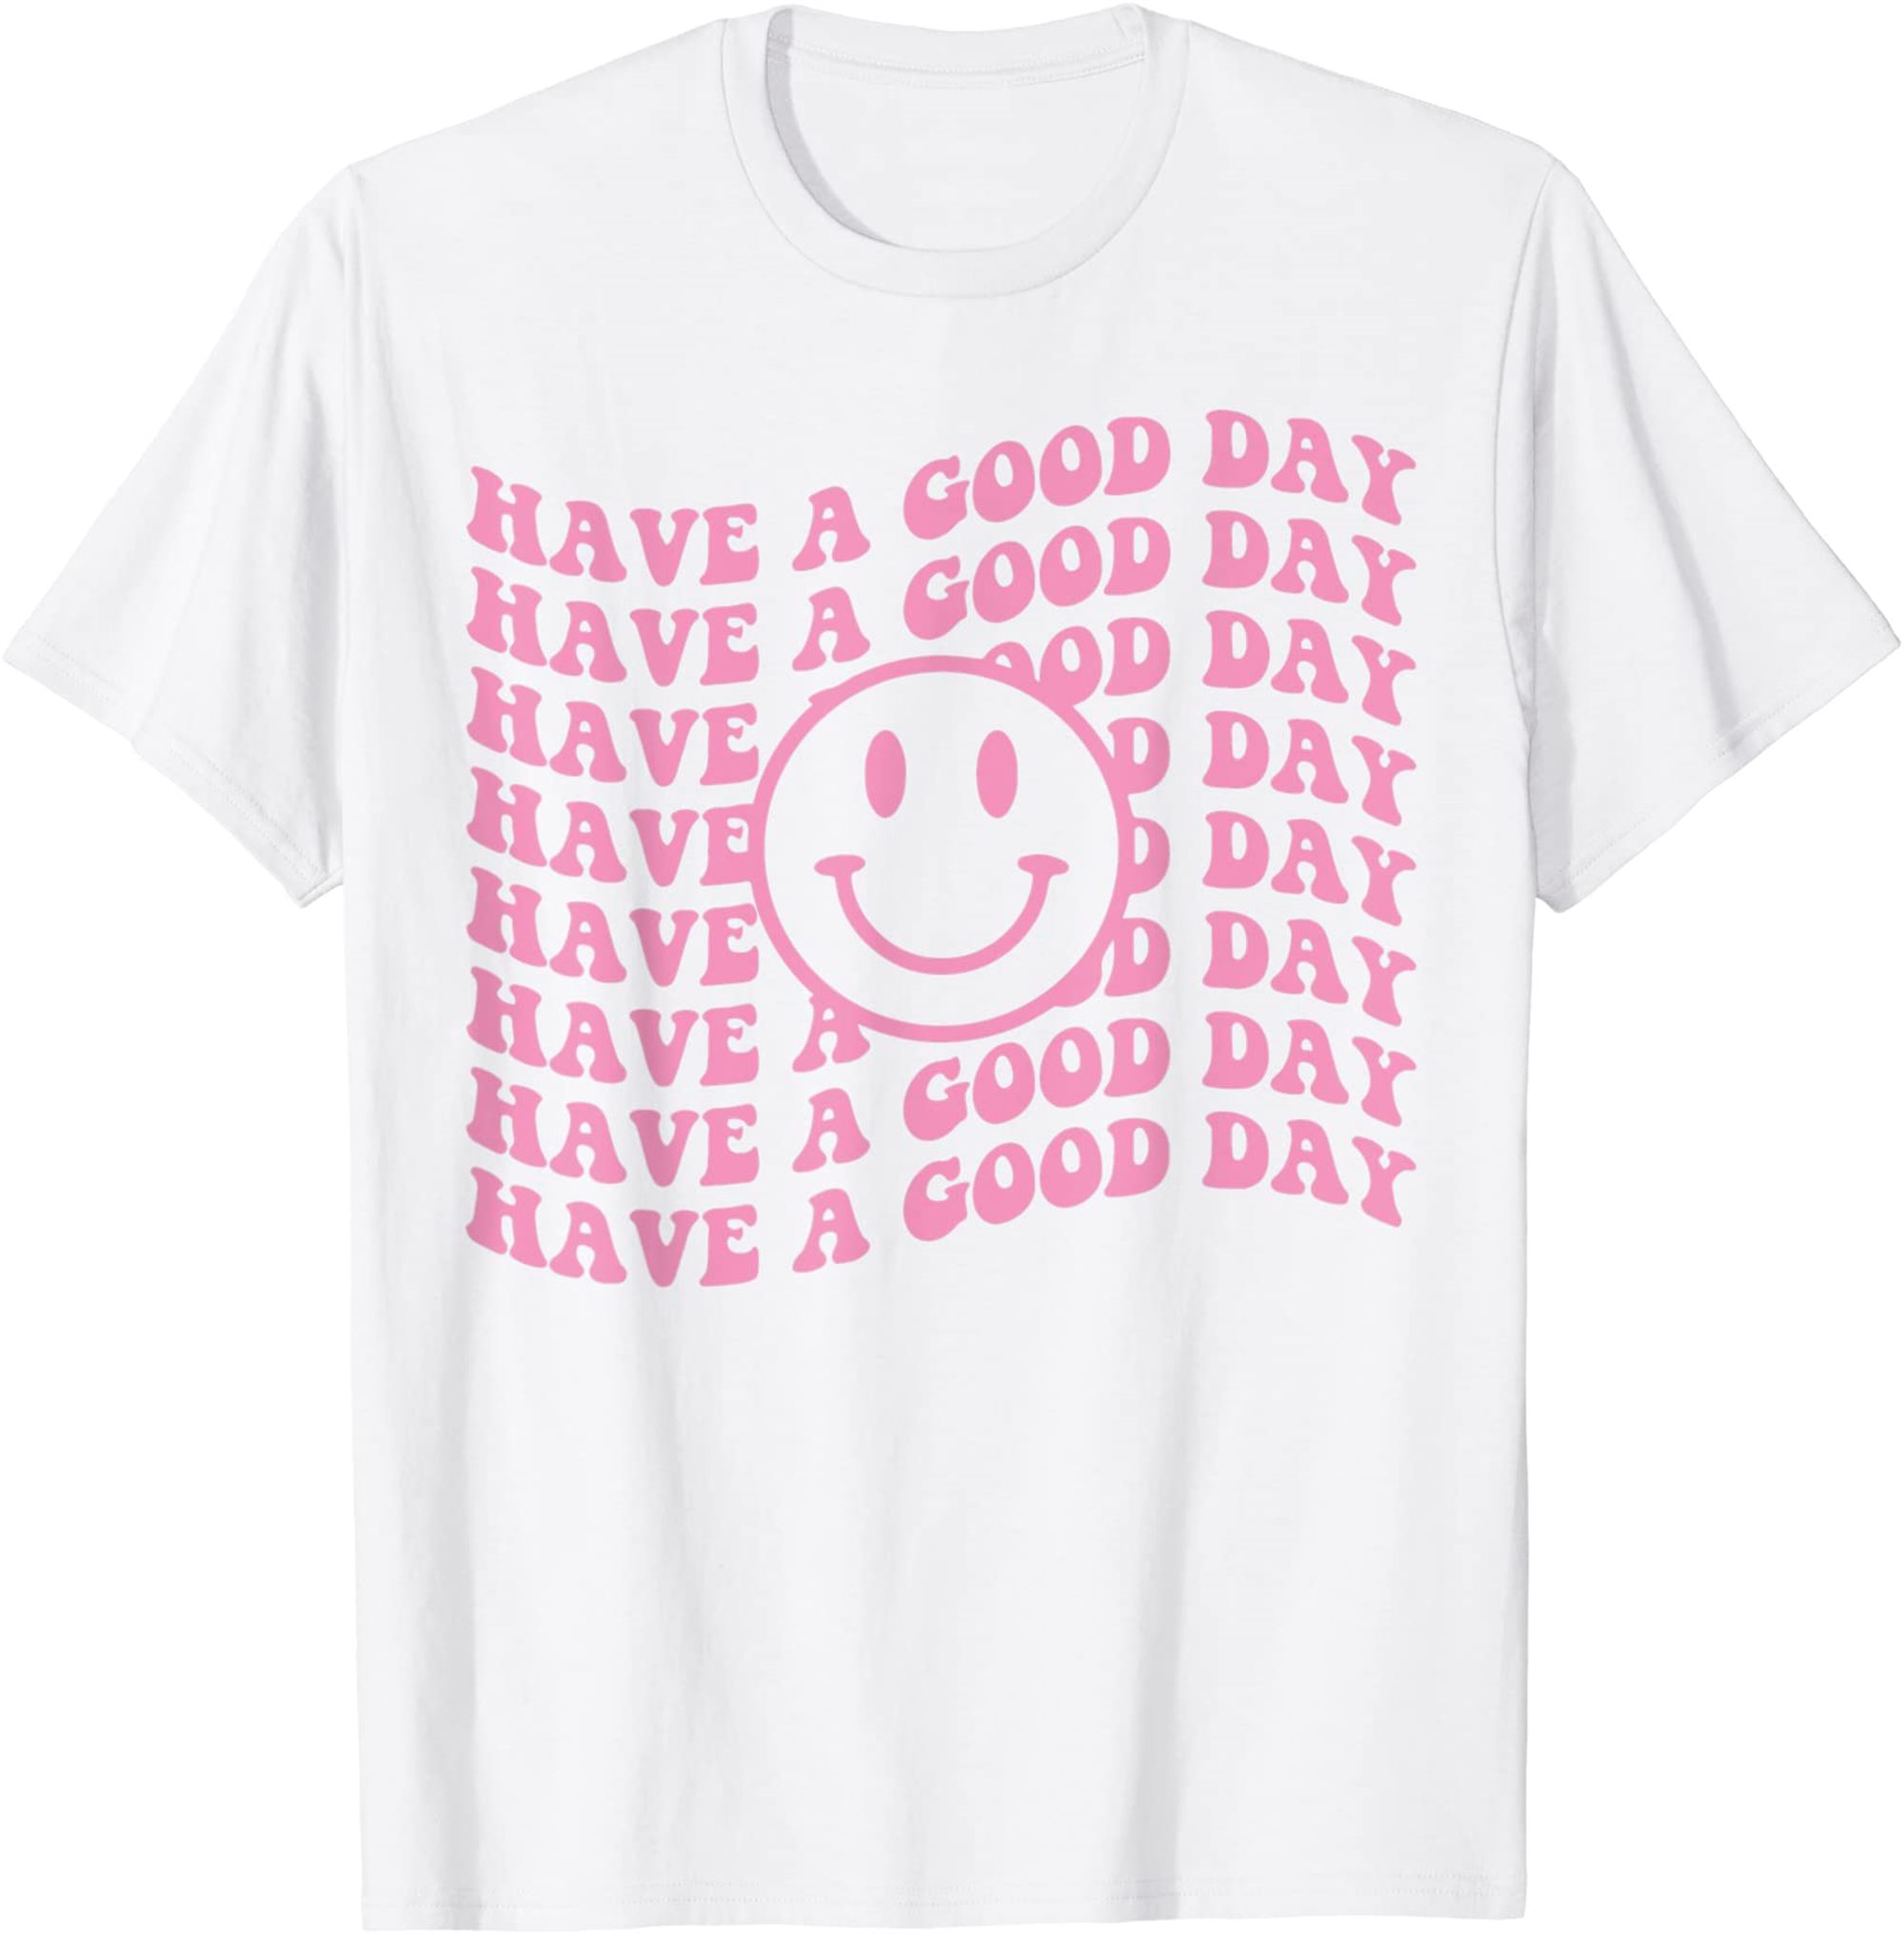 Have A Good Day Retro Tshirt Smiley Face Aesthetic T-shirt Size Up To 5xl